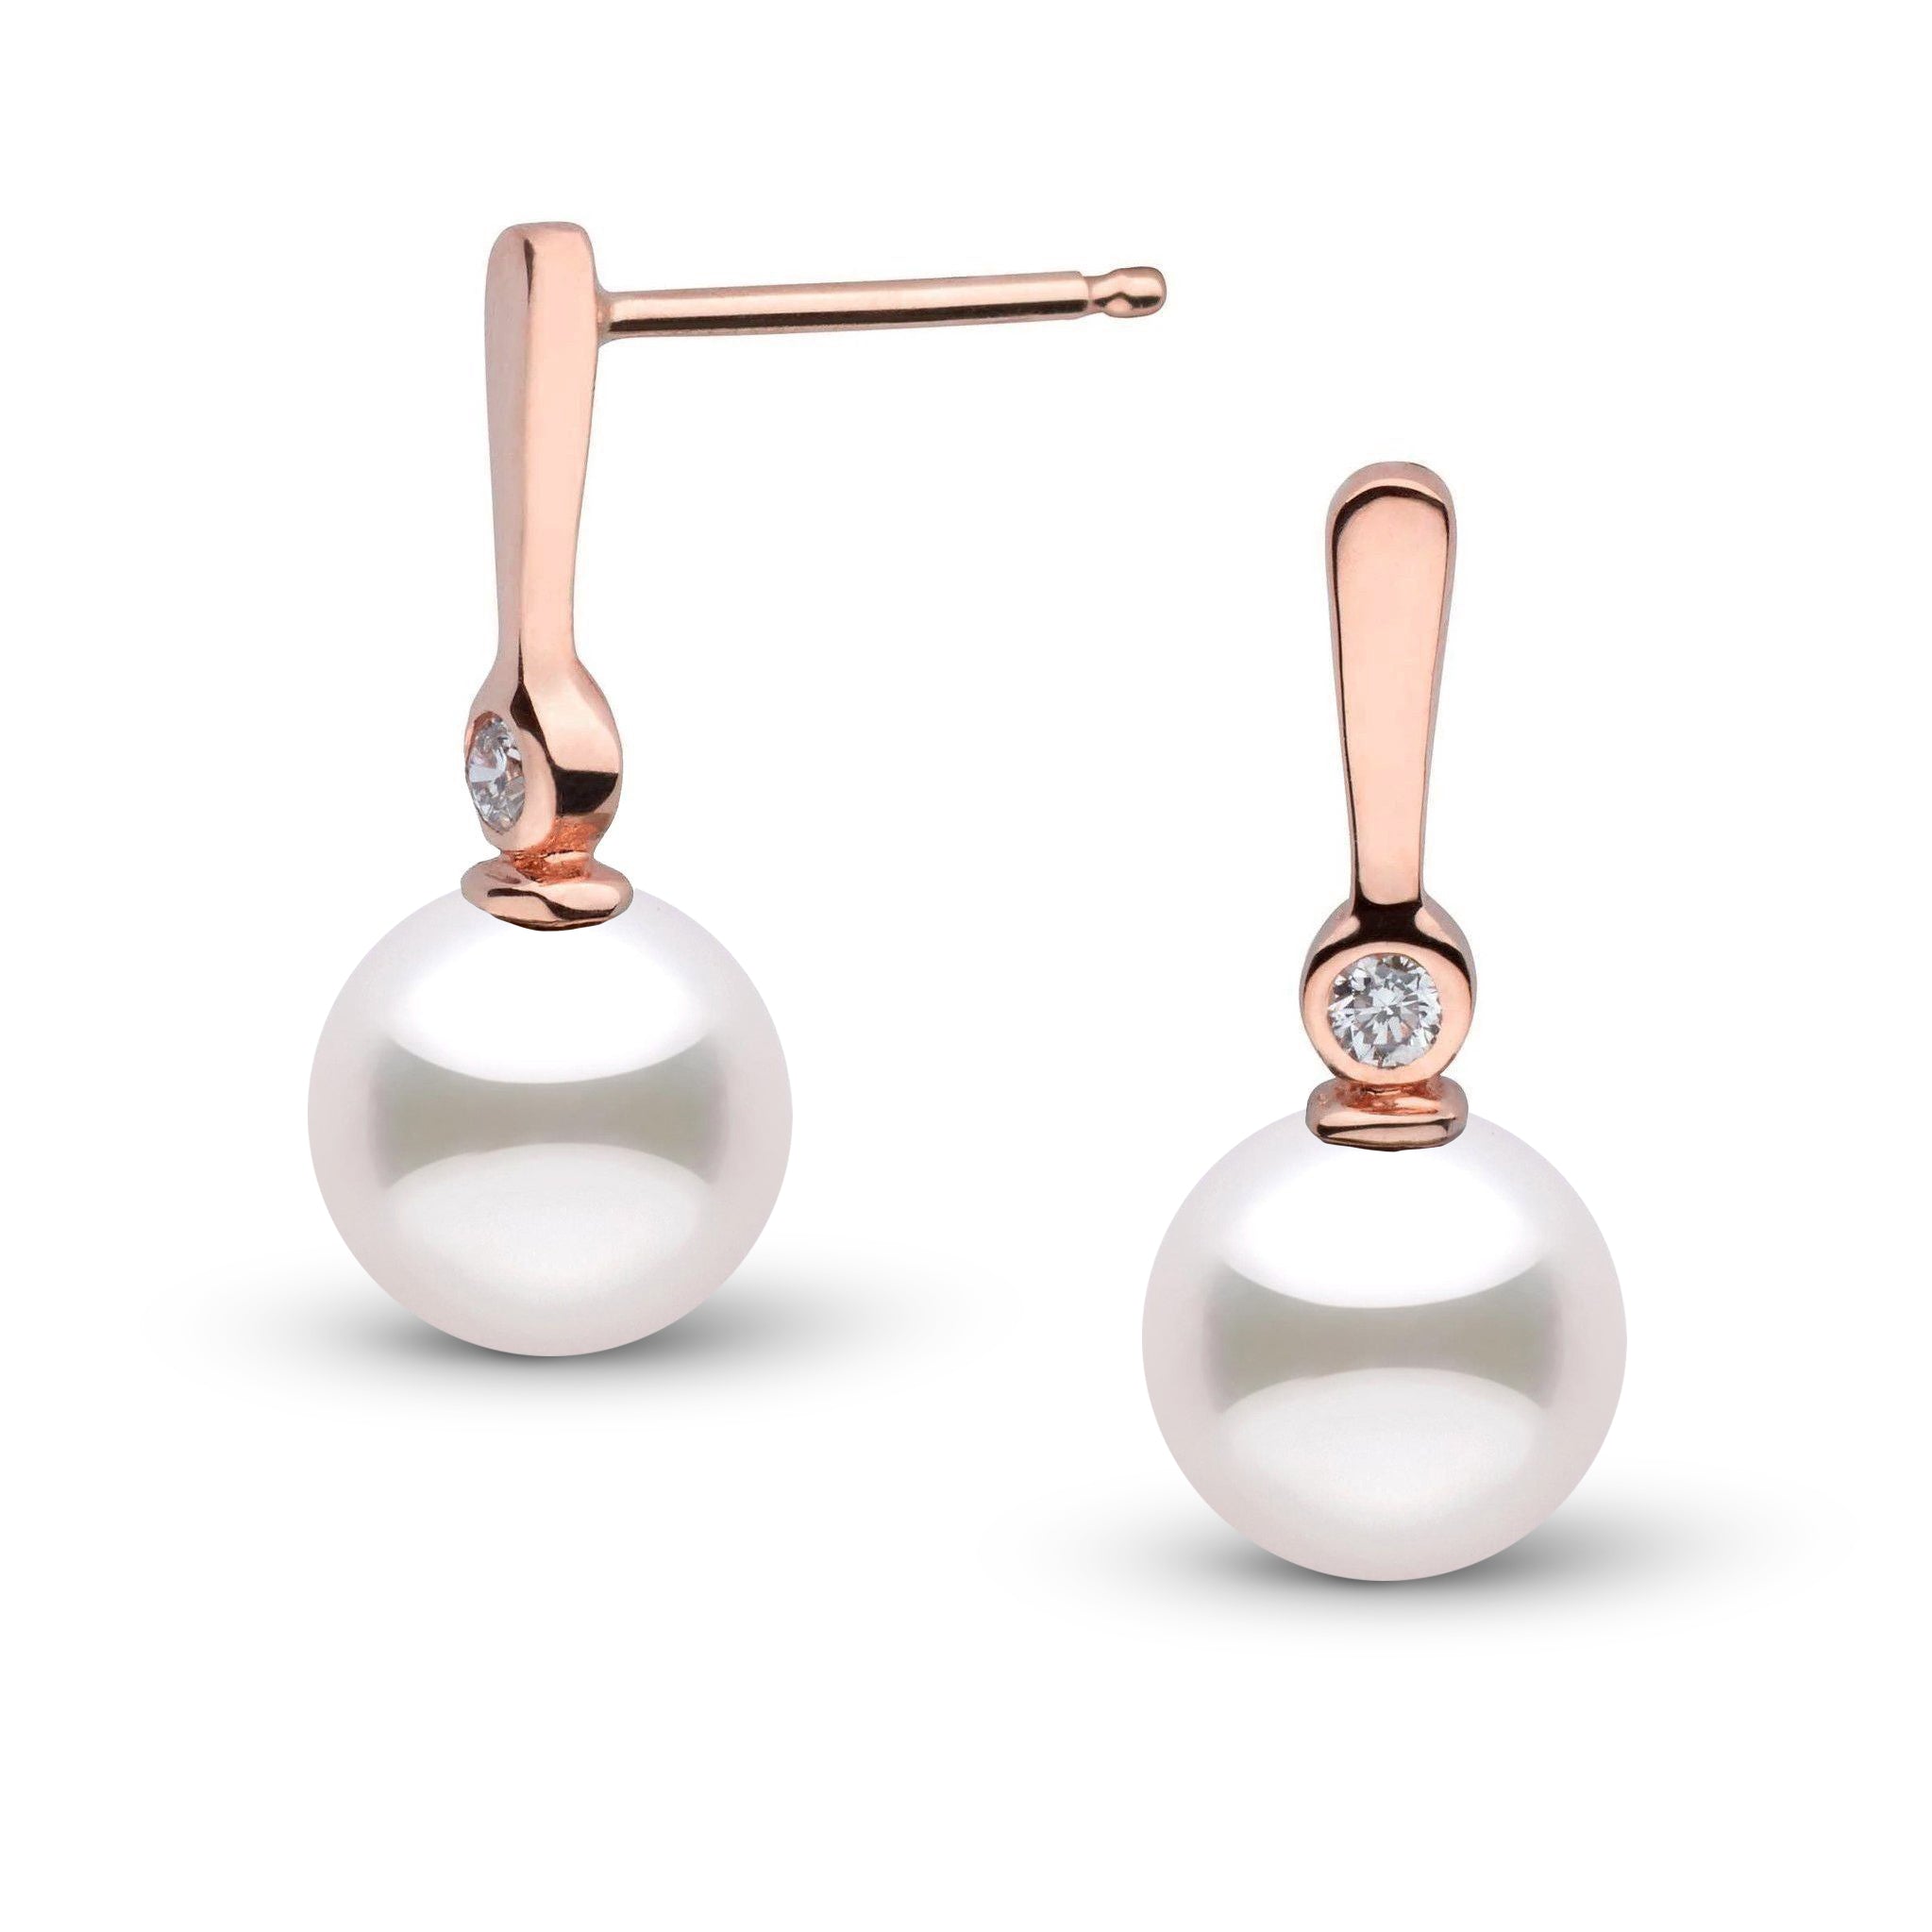 7.5-8.0 mm Akoya Pearl and Diamond Aspire Collection Earrings rose gold